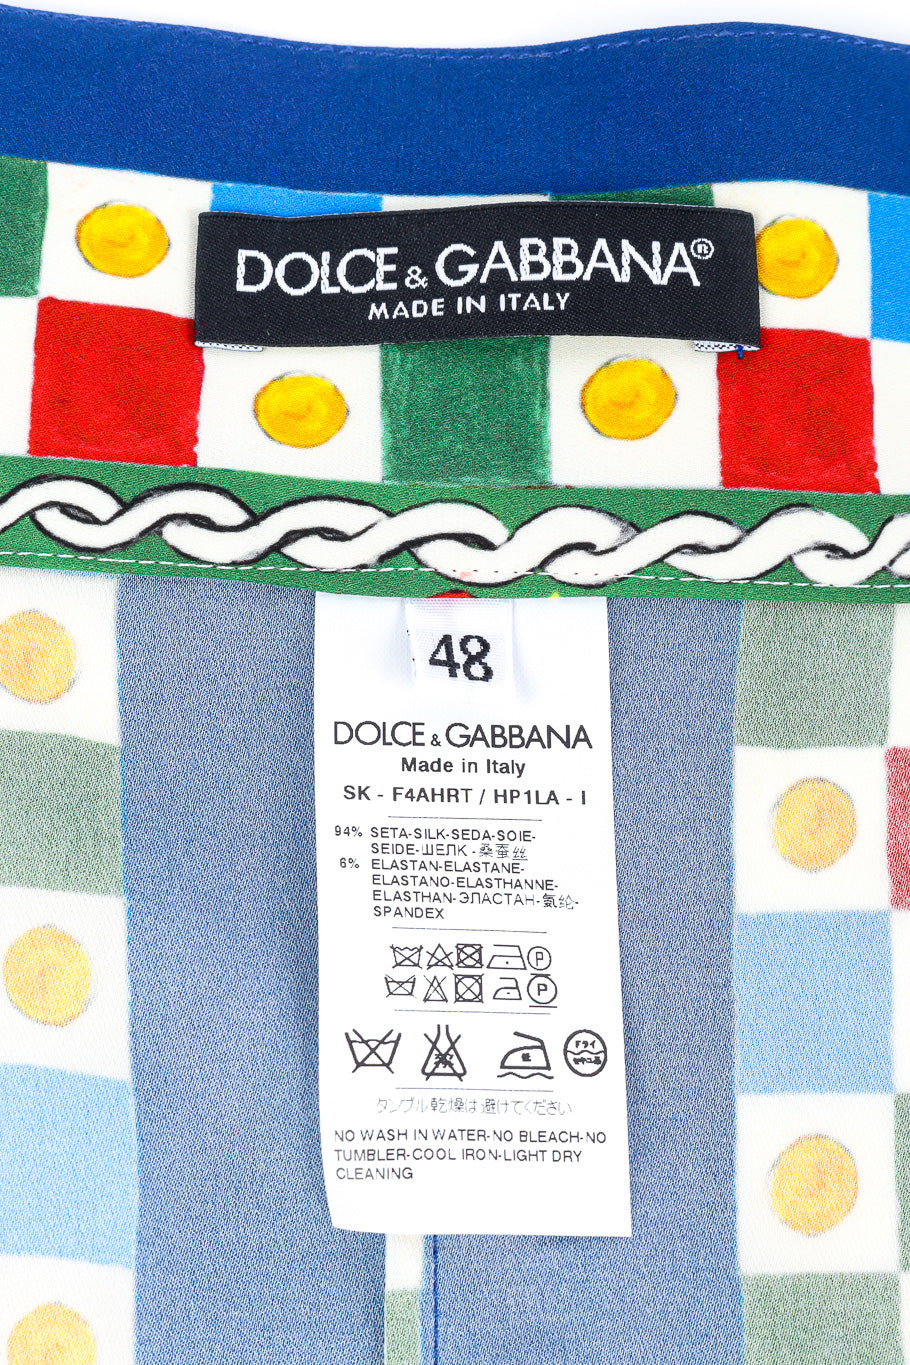 Dolce & Gabbana multicolor printed skirt designer tag, size and fabric content @recessla